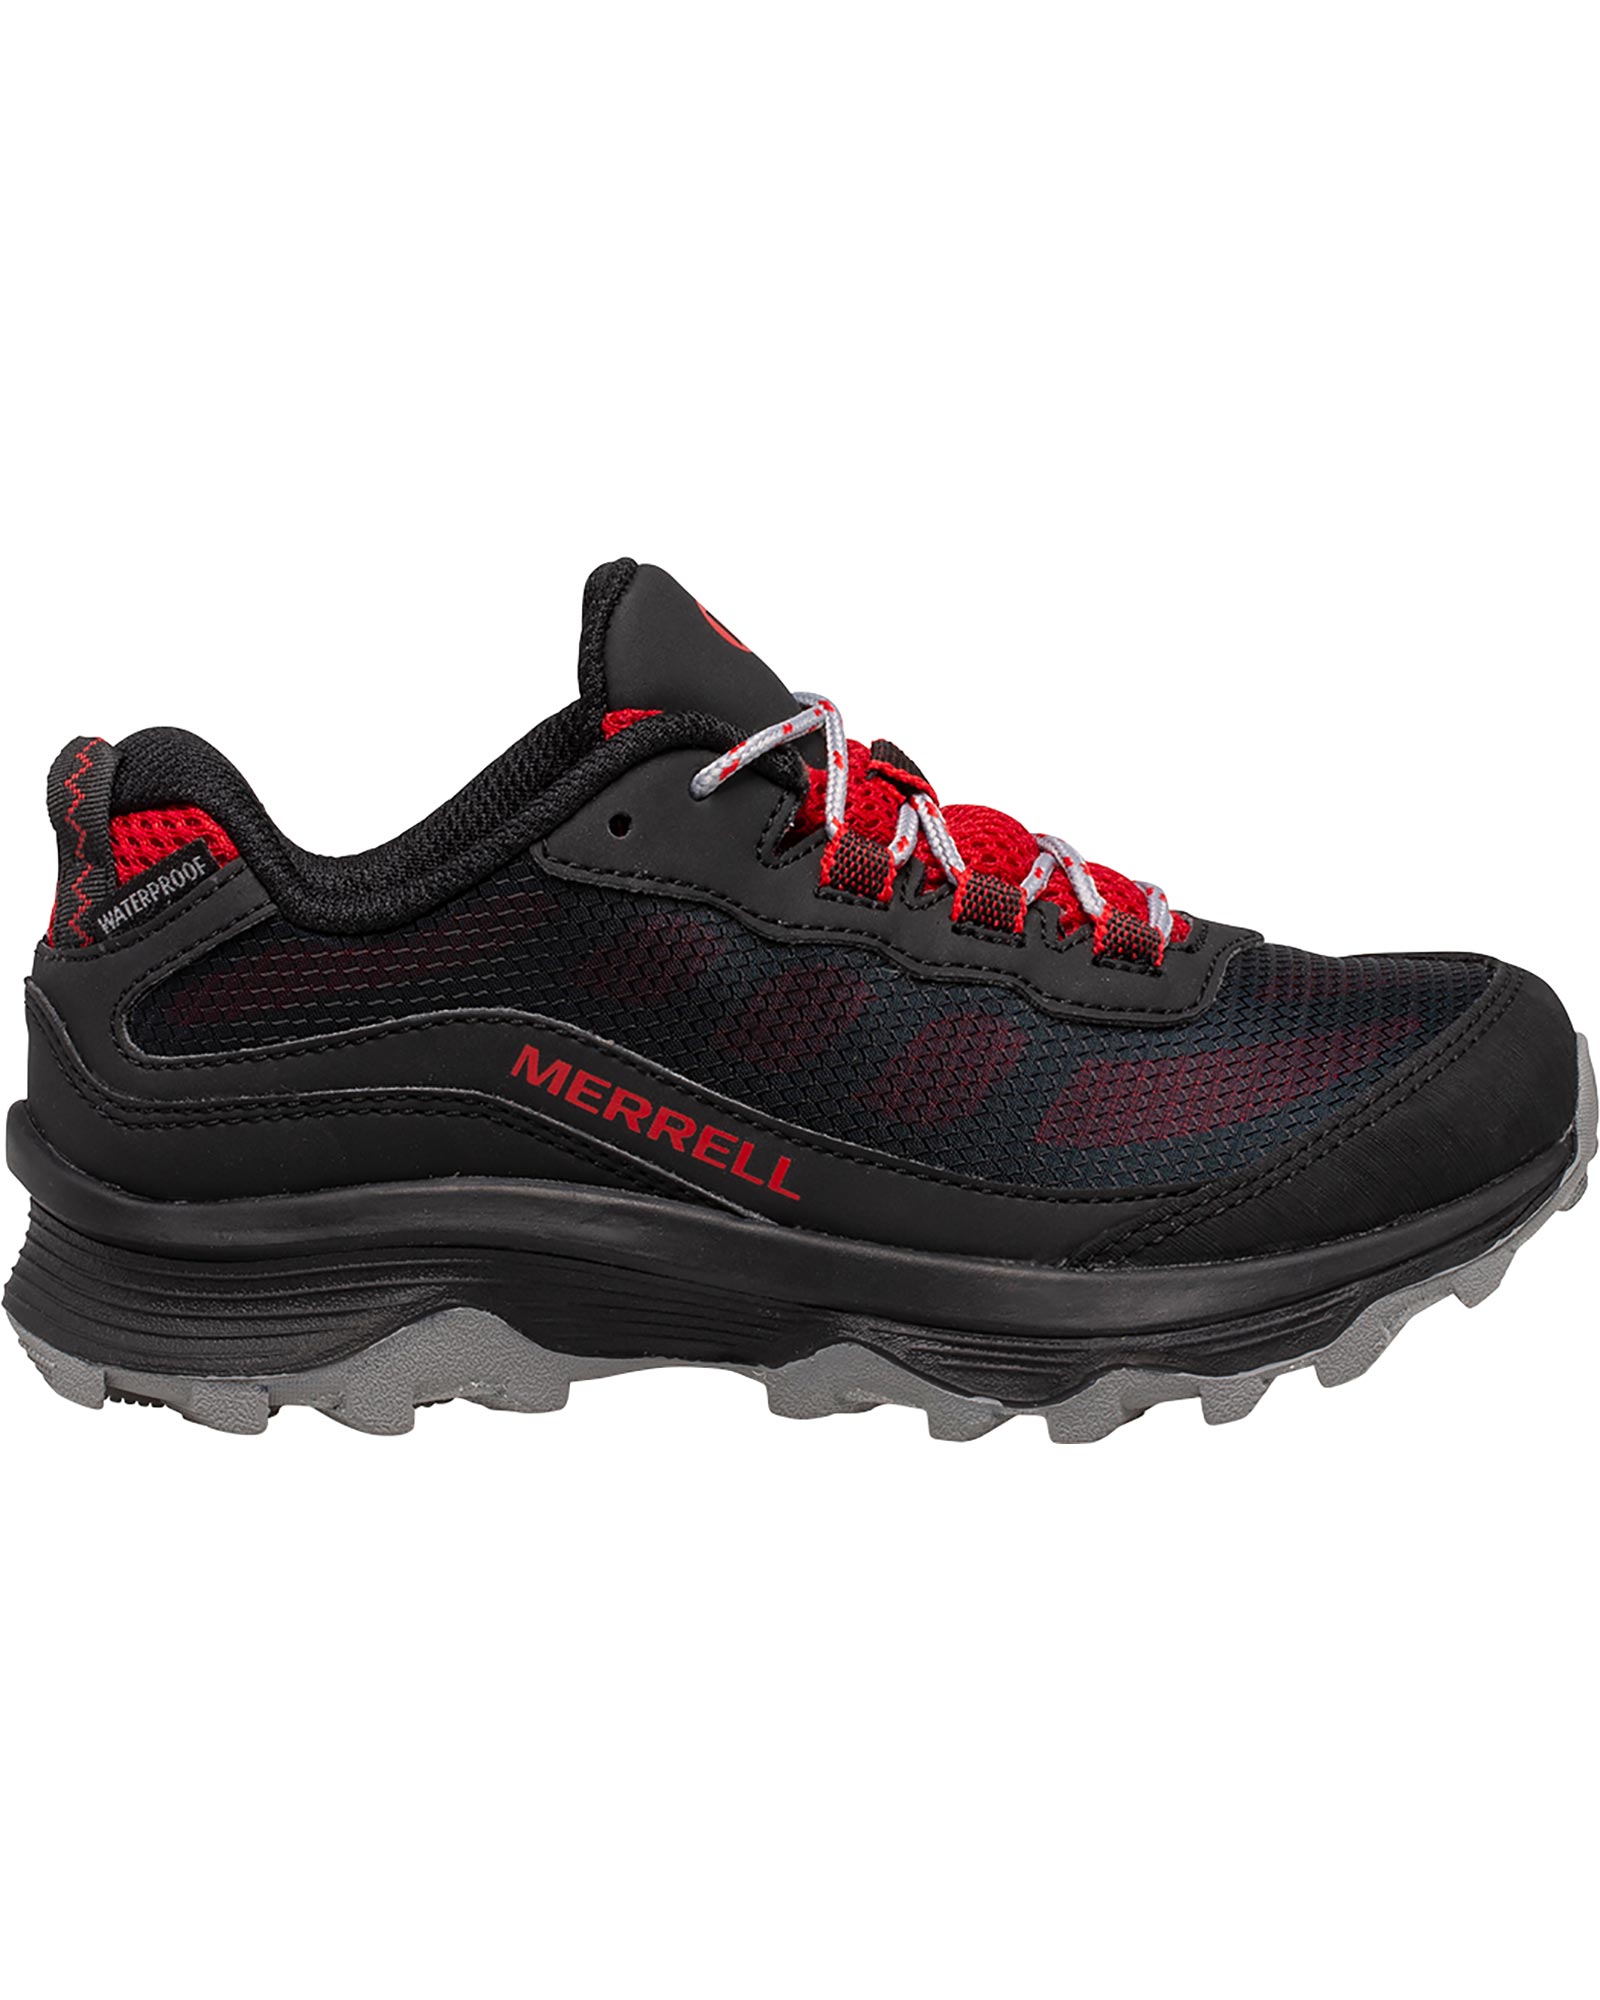 Merrell Moab Speed Laces Kids’ Waterproof Shoes - Grey/Black/Red UK 1